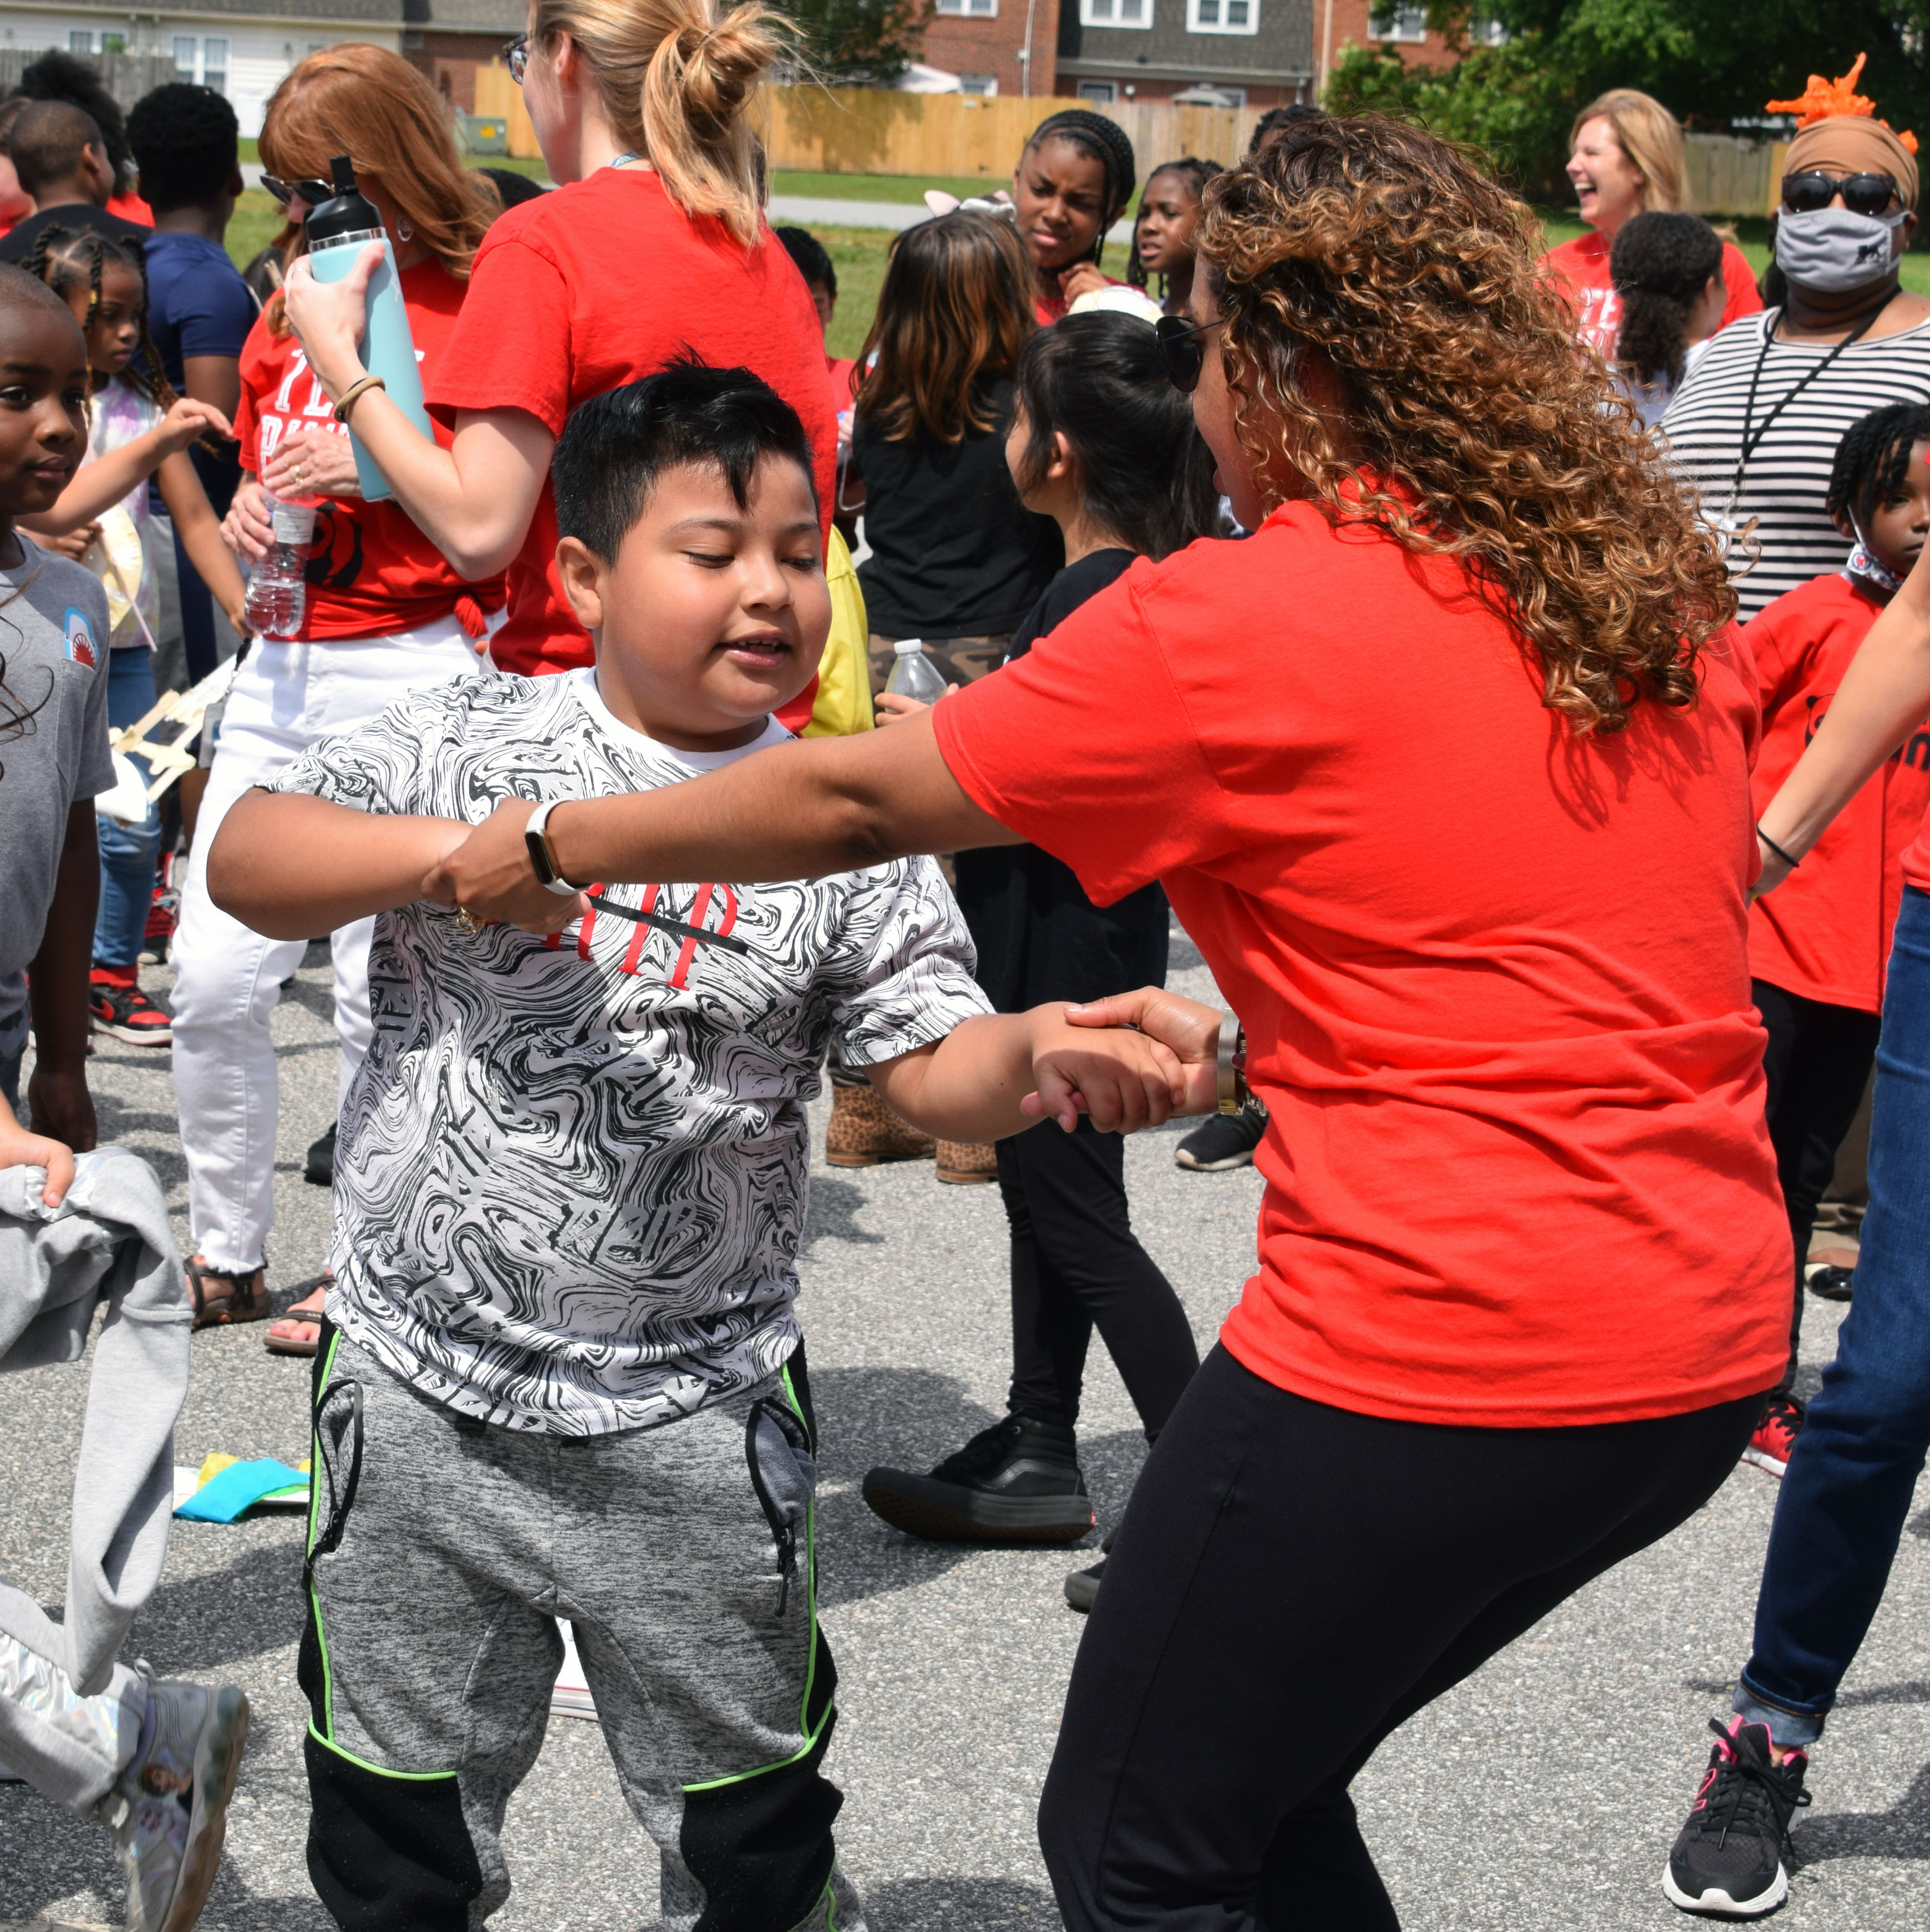 Teachers and students danced together to top off a happy anniversary celebration.